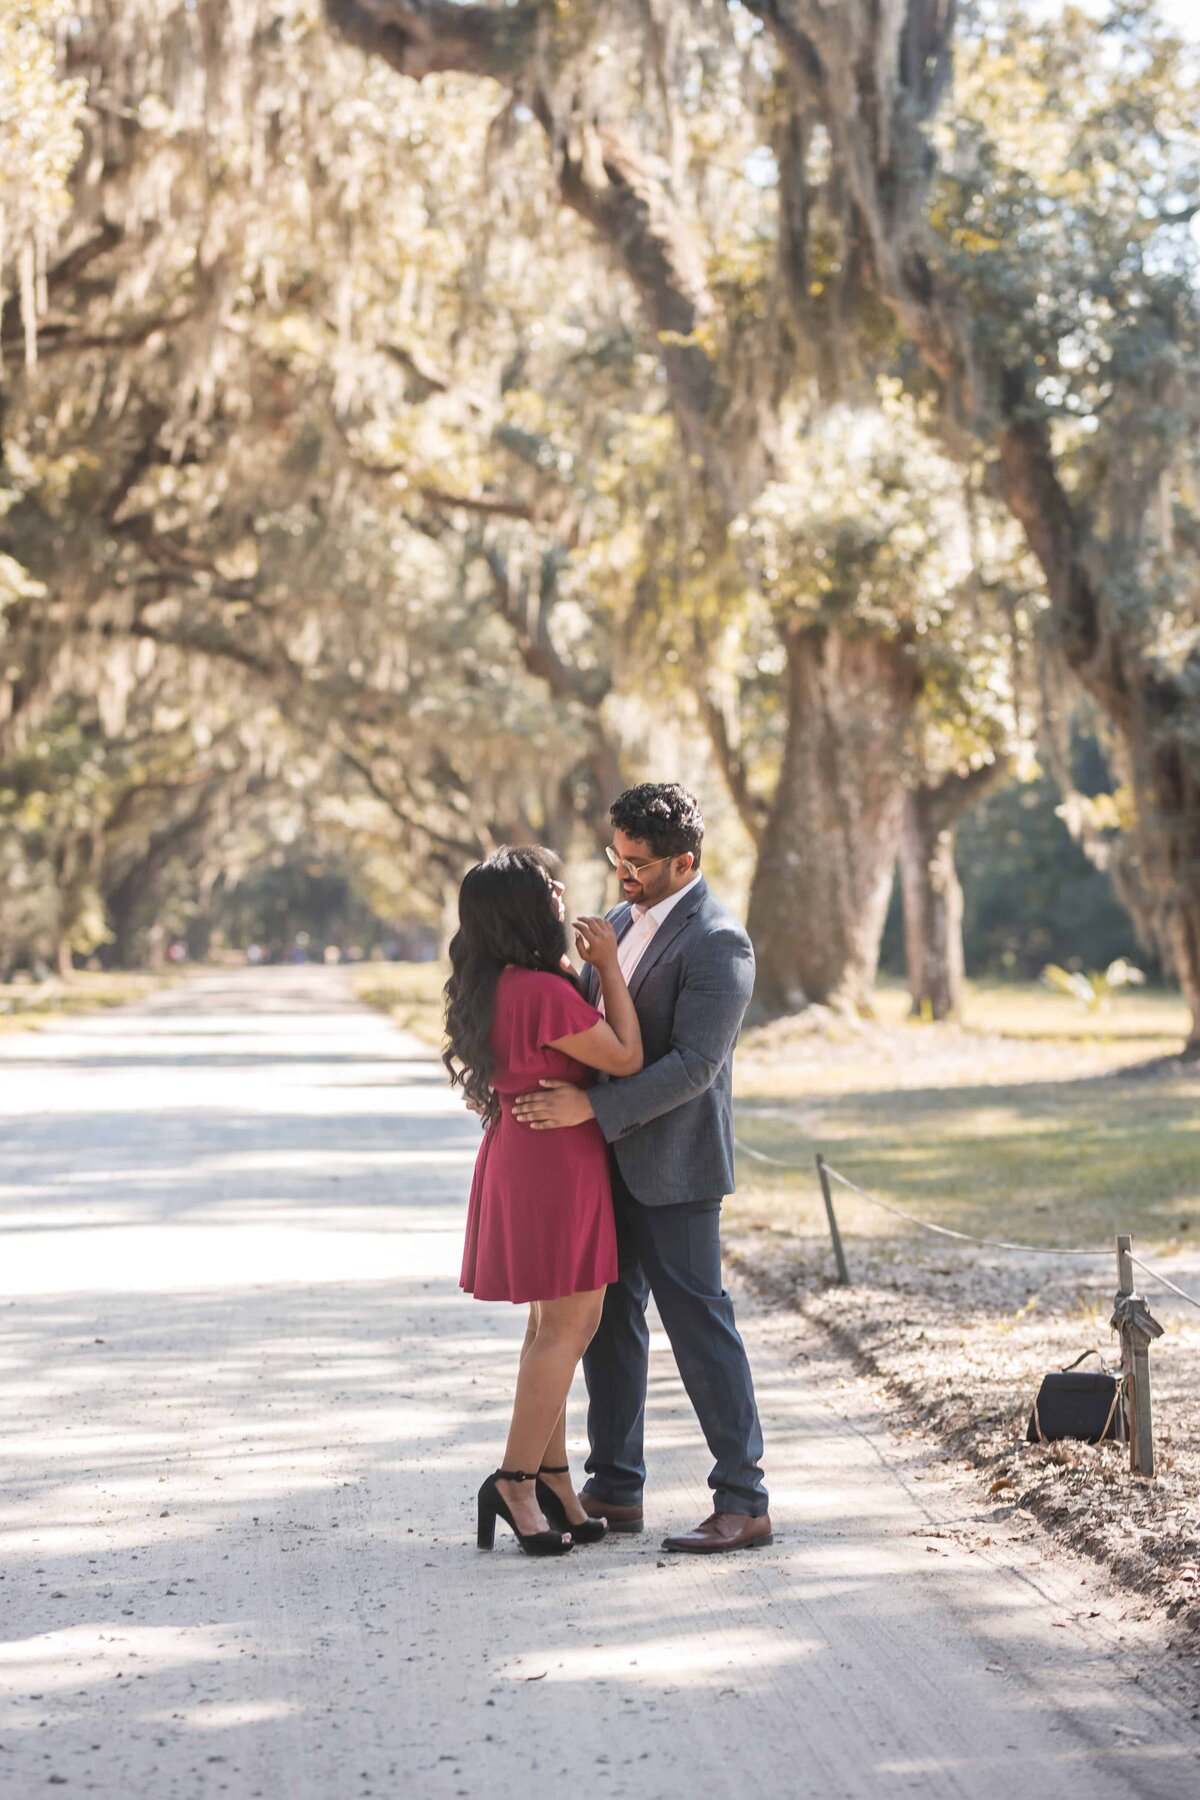 Engagement Photos at Wormsloe Historic Site by Phavy Photography, Savannah proposal photographer